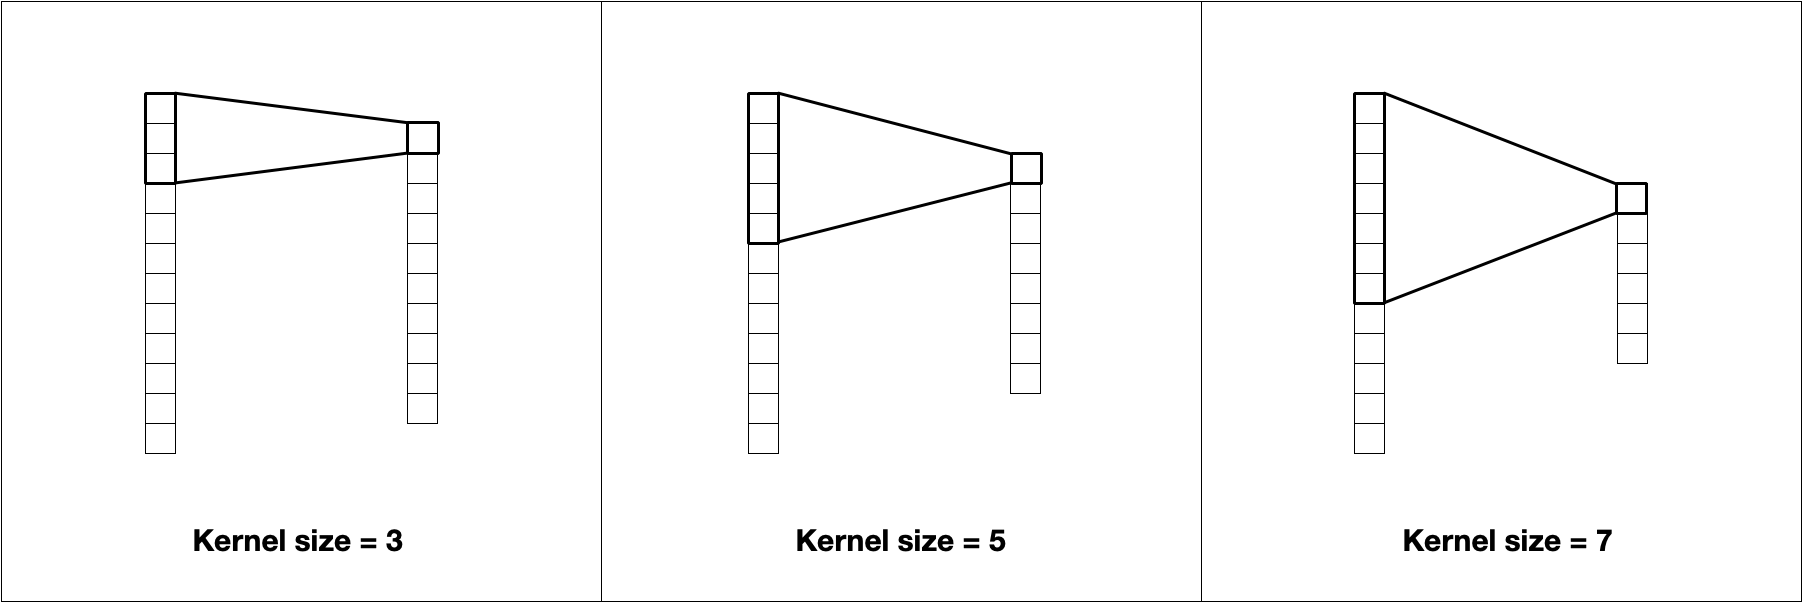 The kernel size affects the size of the output. A kernel size of 3 uses the information from 3 values to compute 1 value.